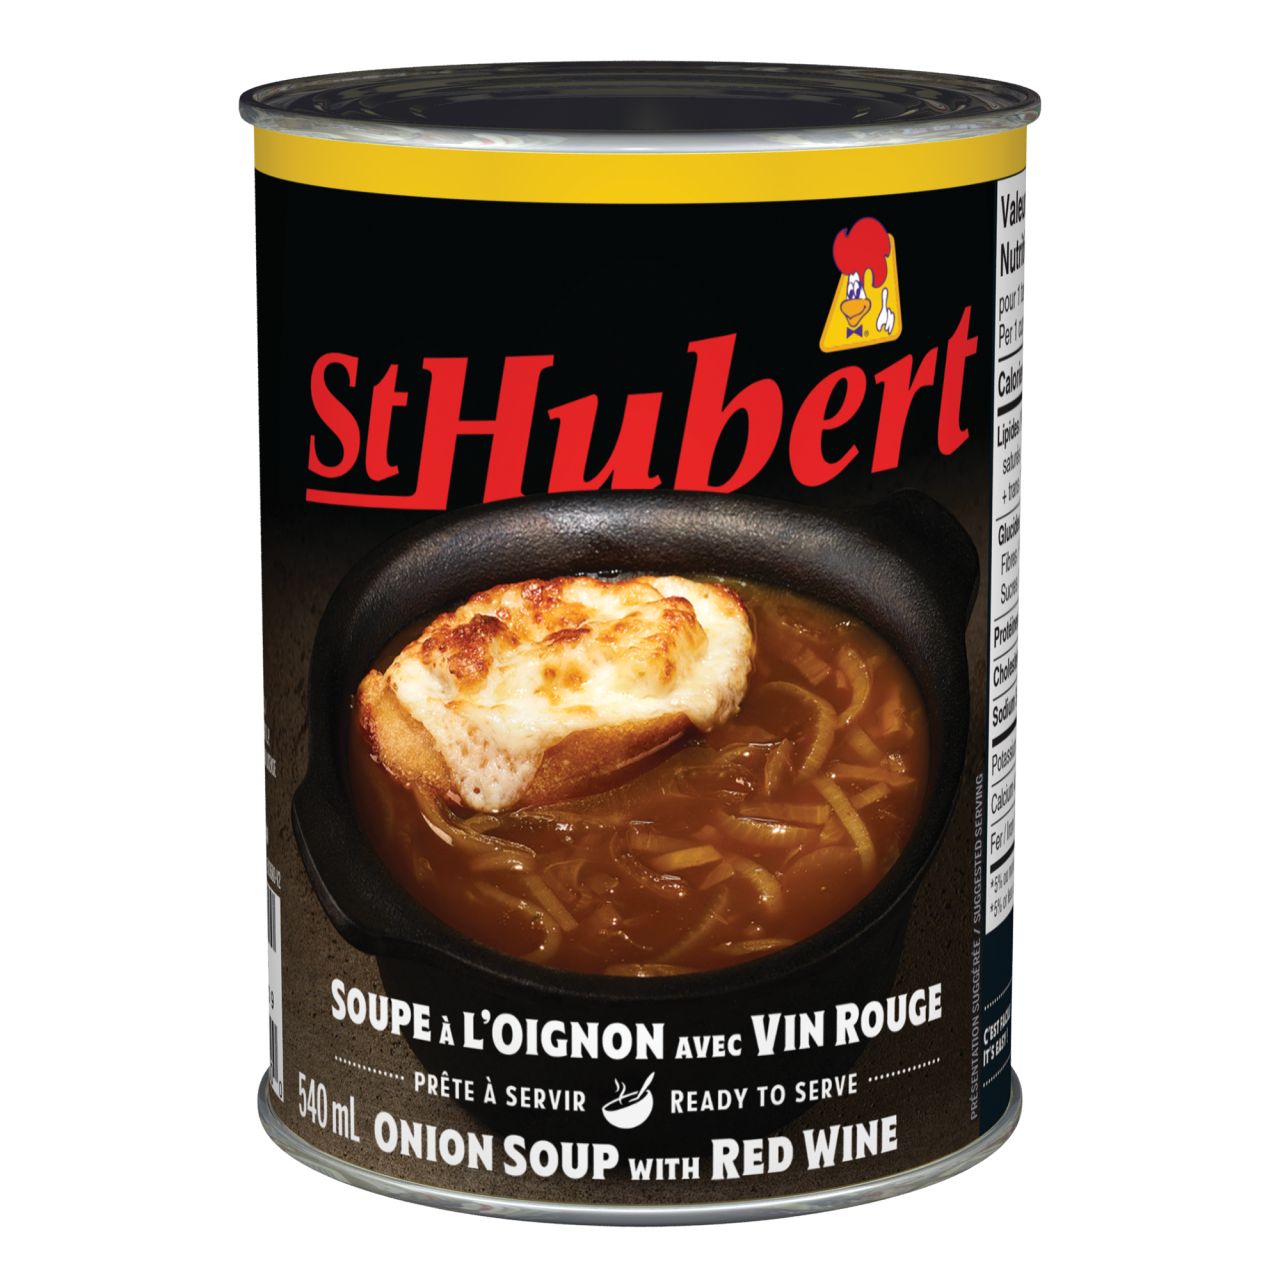 St-Hubert Onion Soup with Red Wine